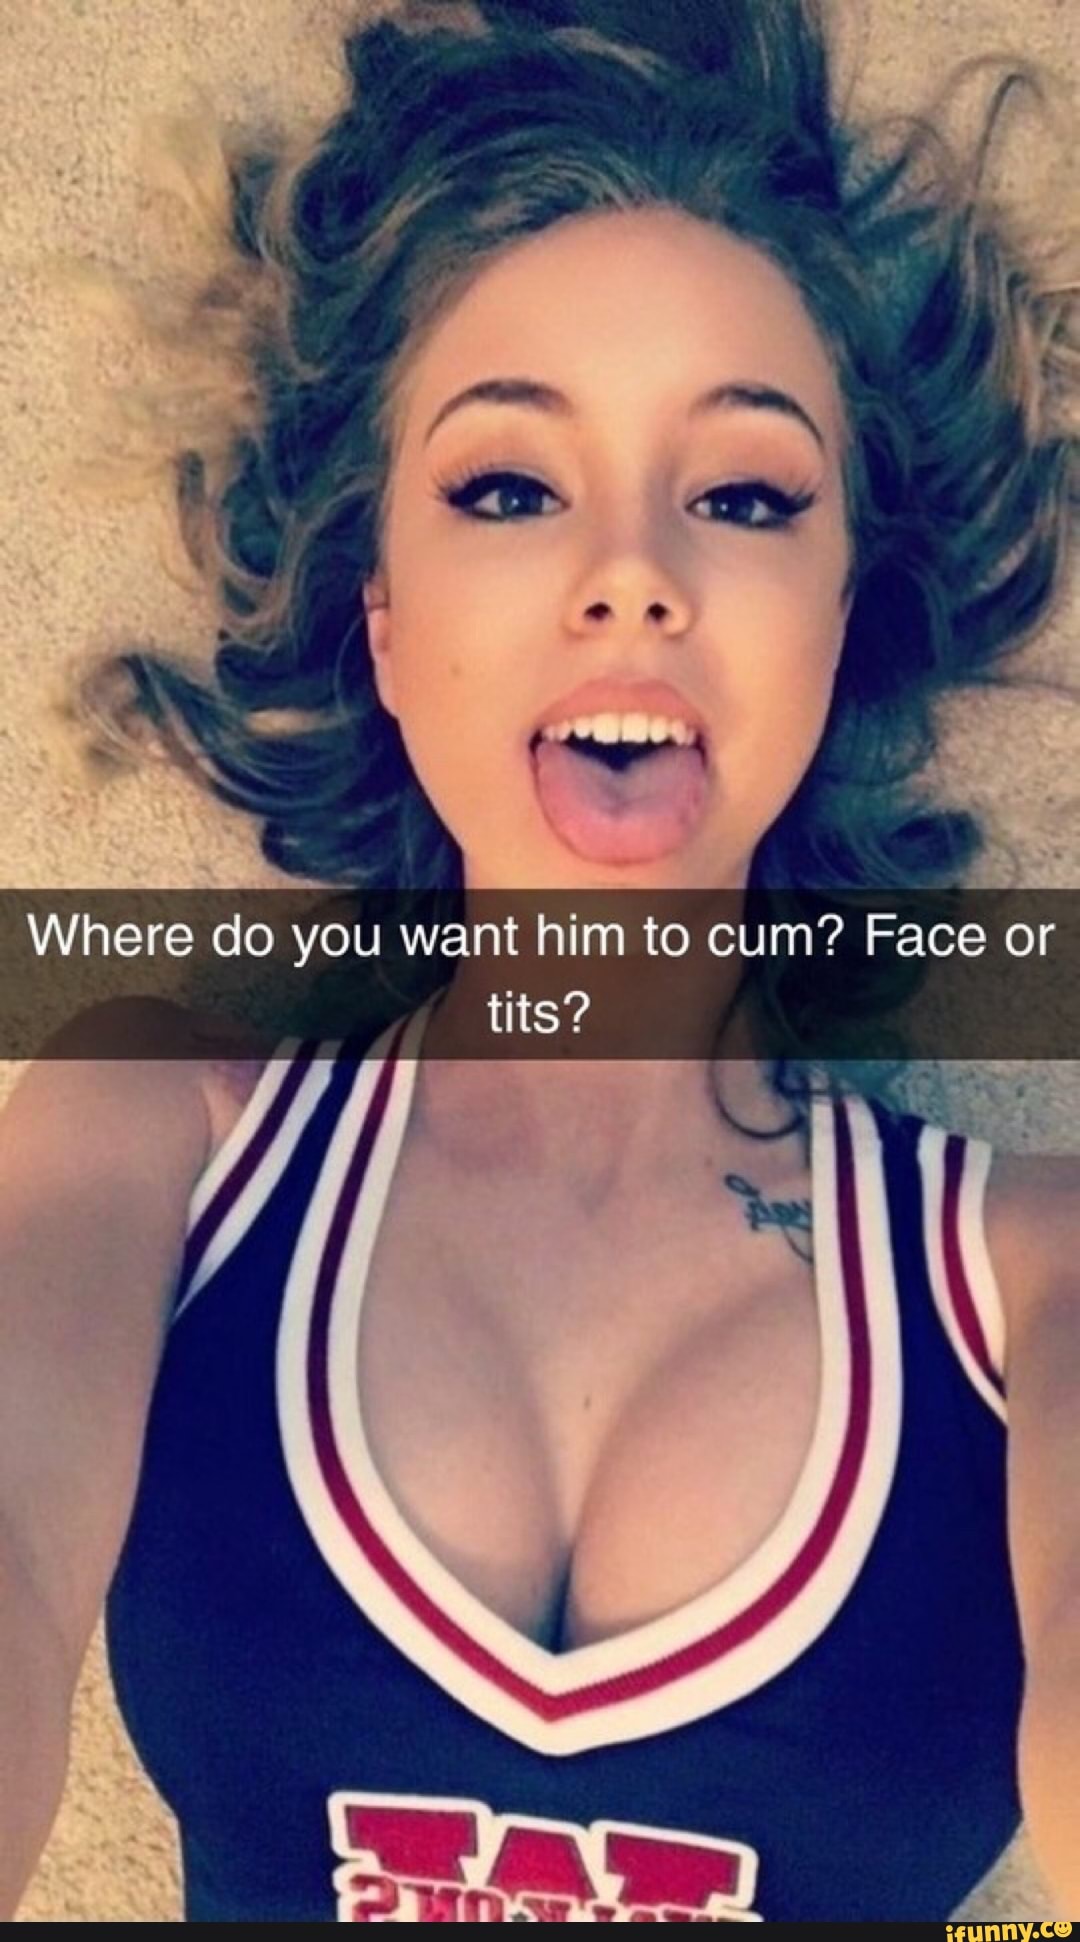 bev breece recommends Where Do You Want To Cum